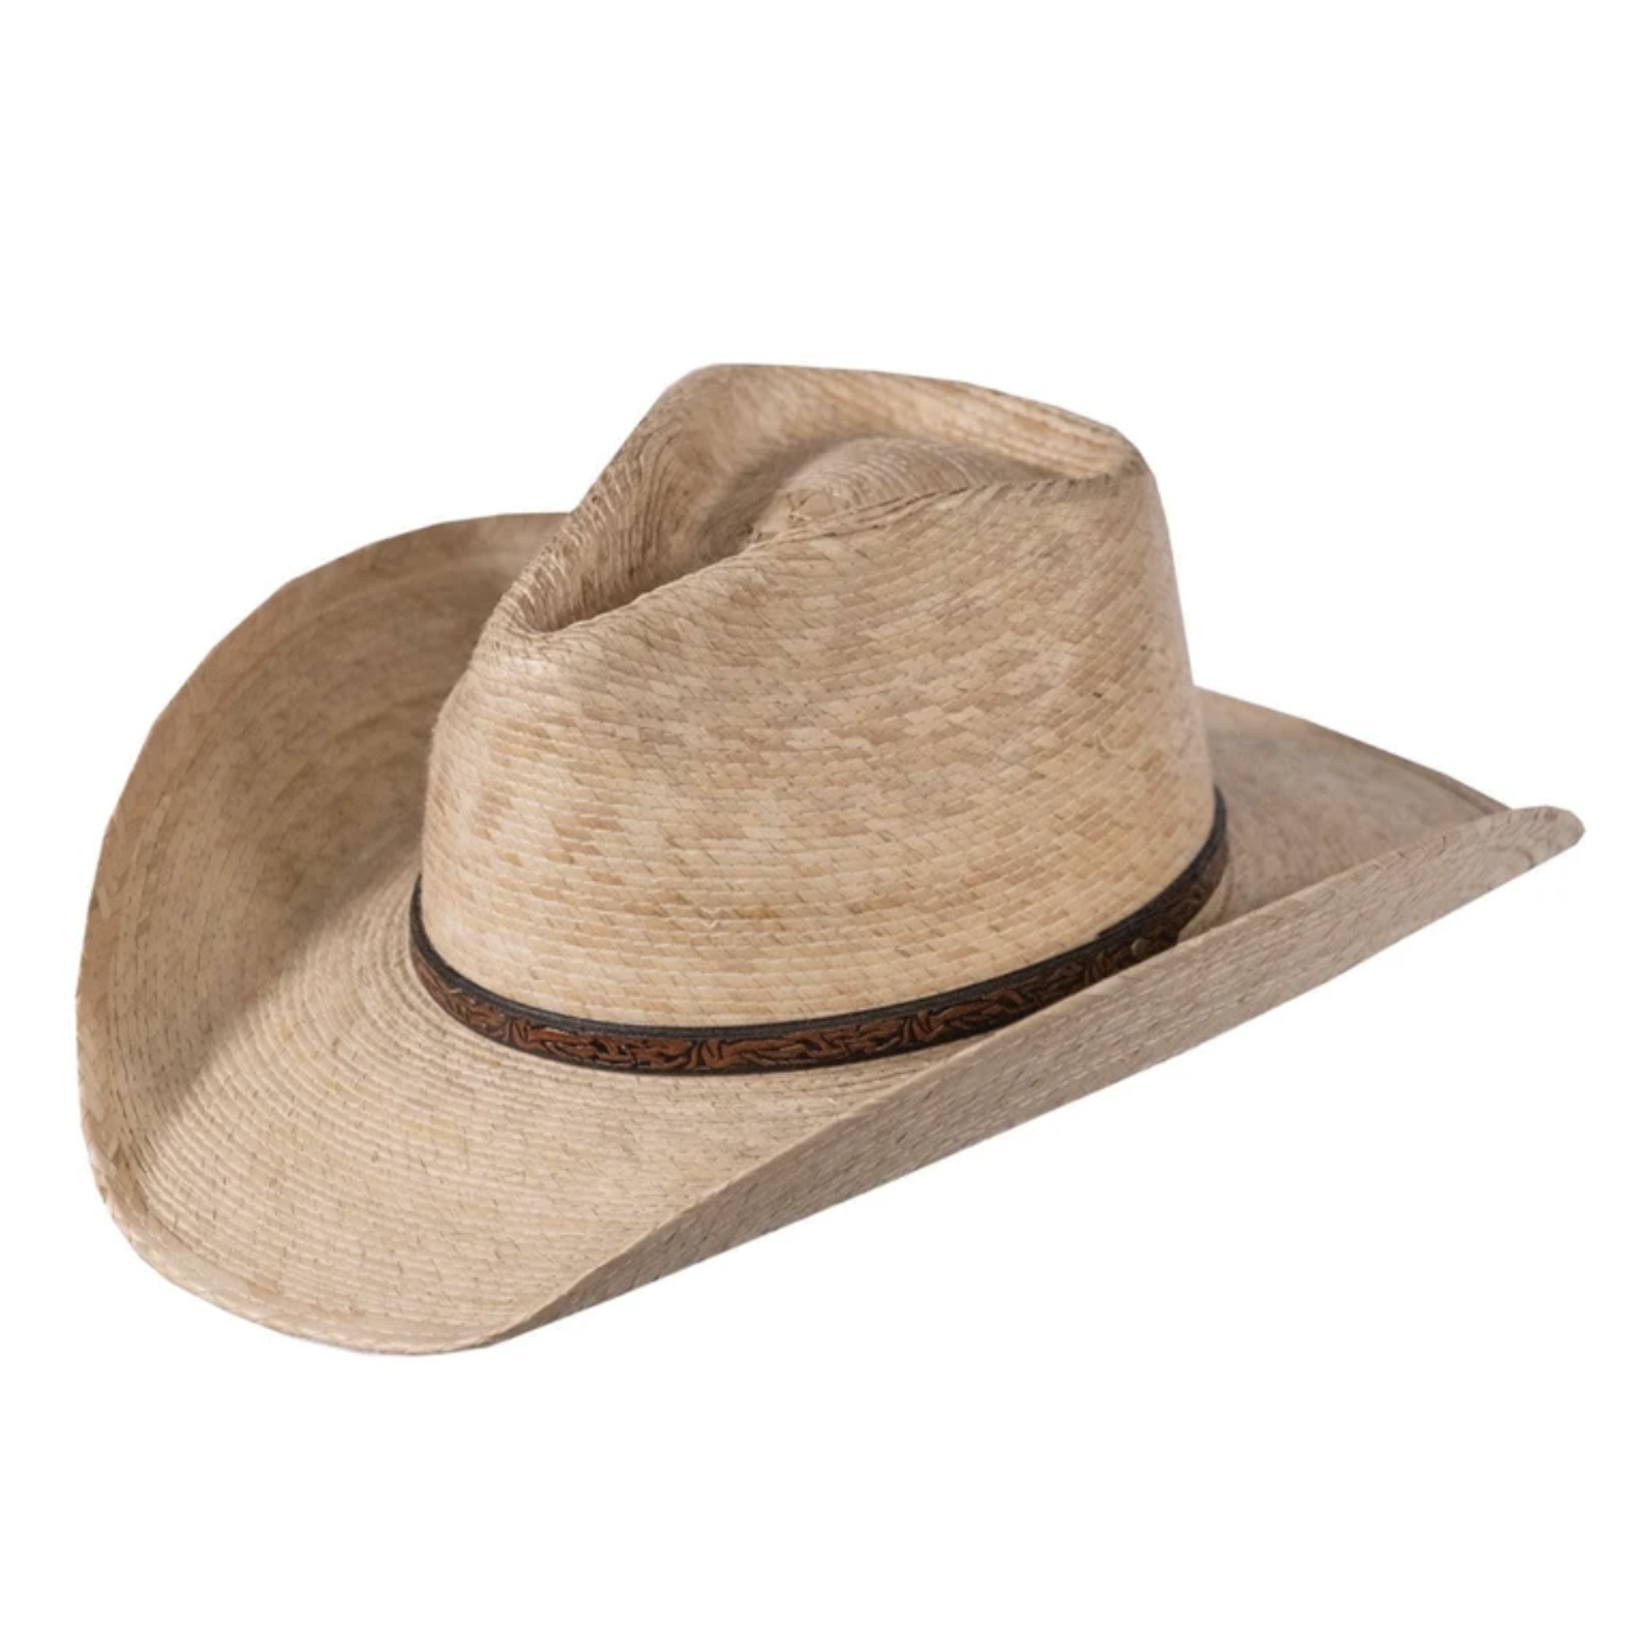 Outback Trading Company Rio Straw Hat